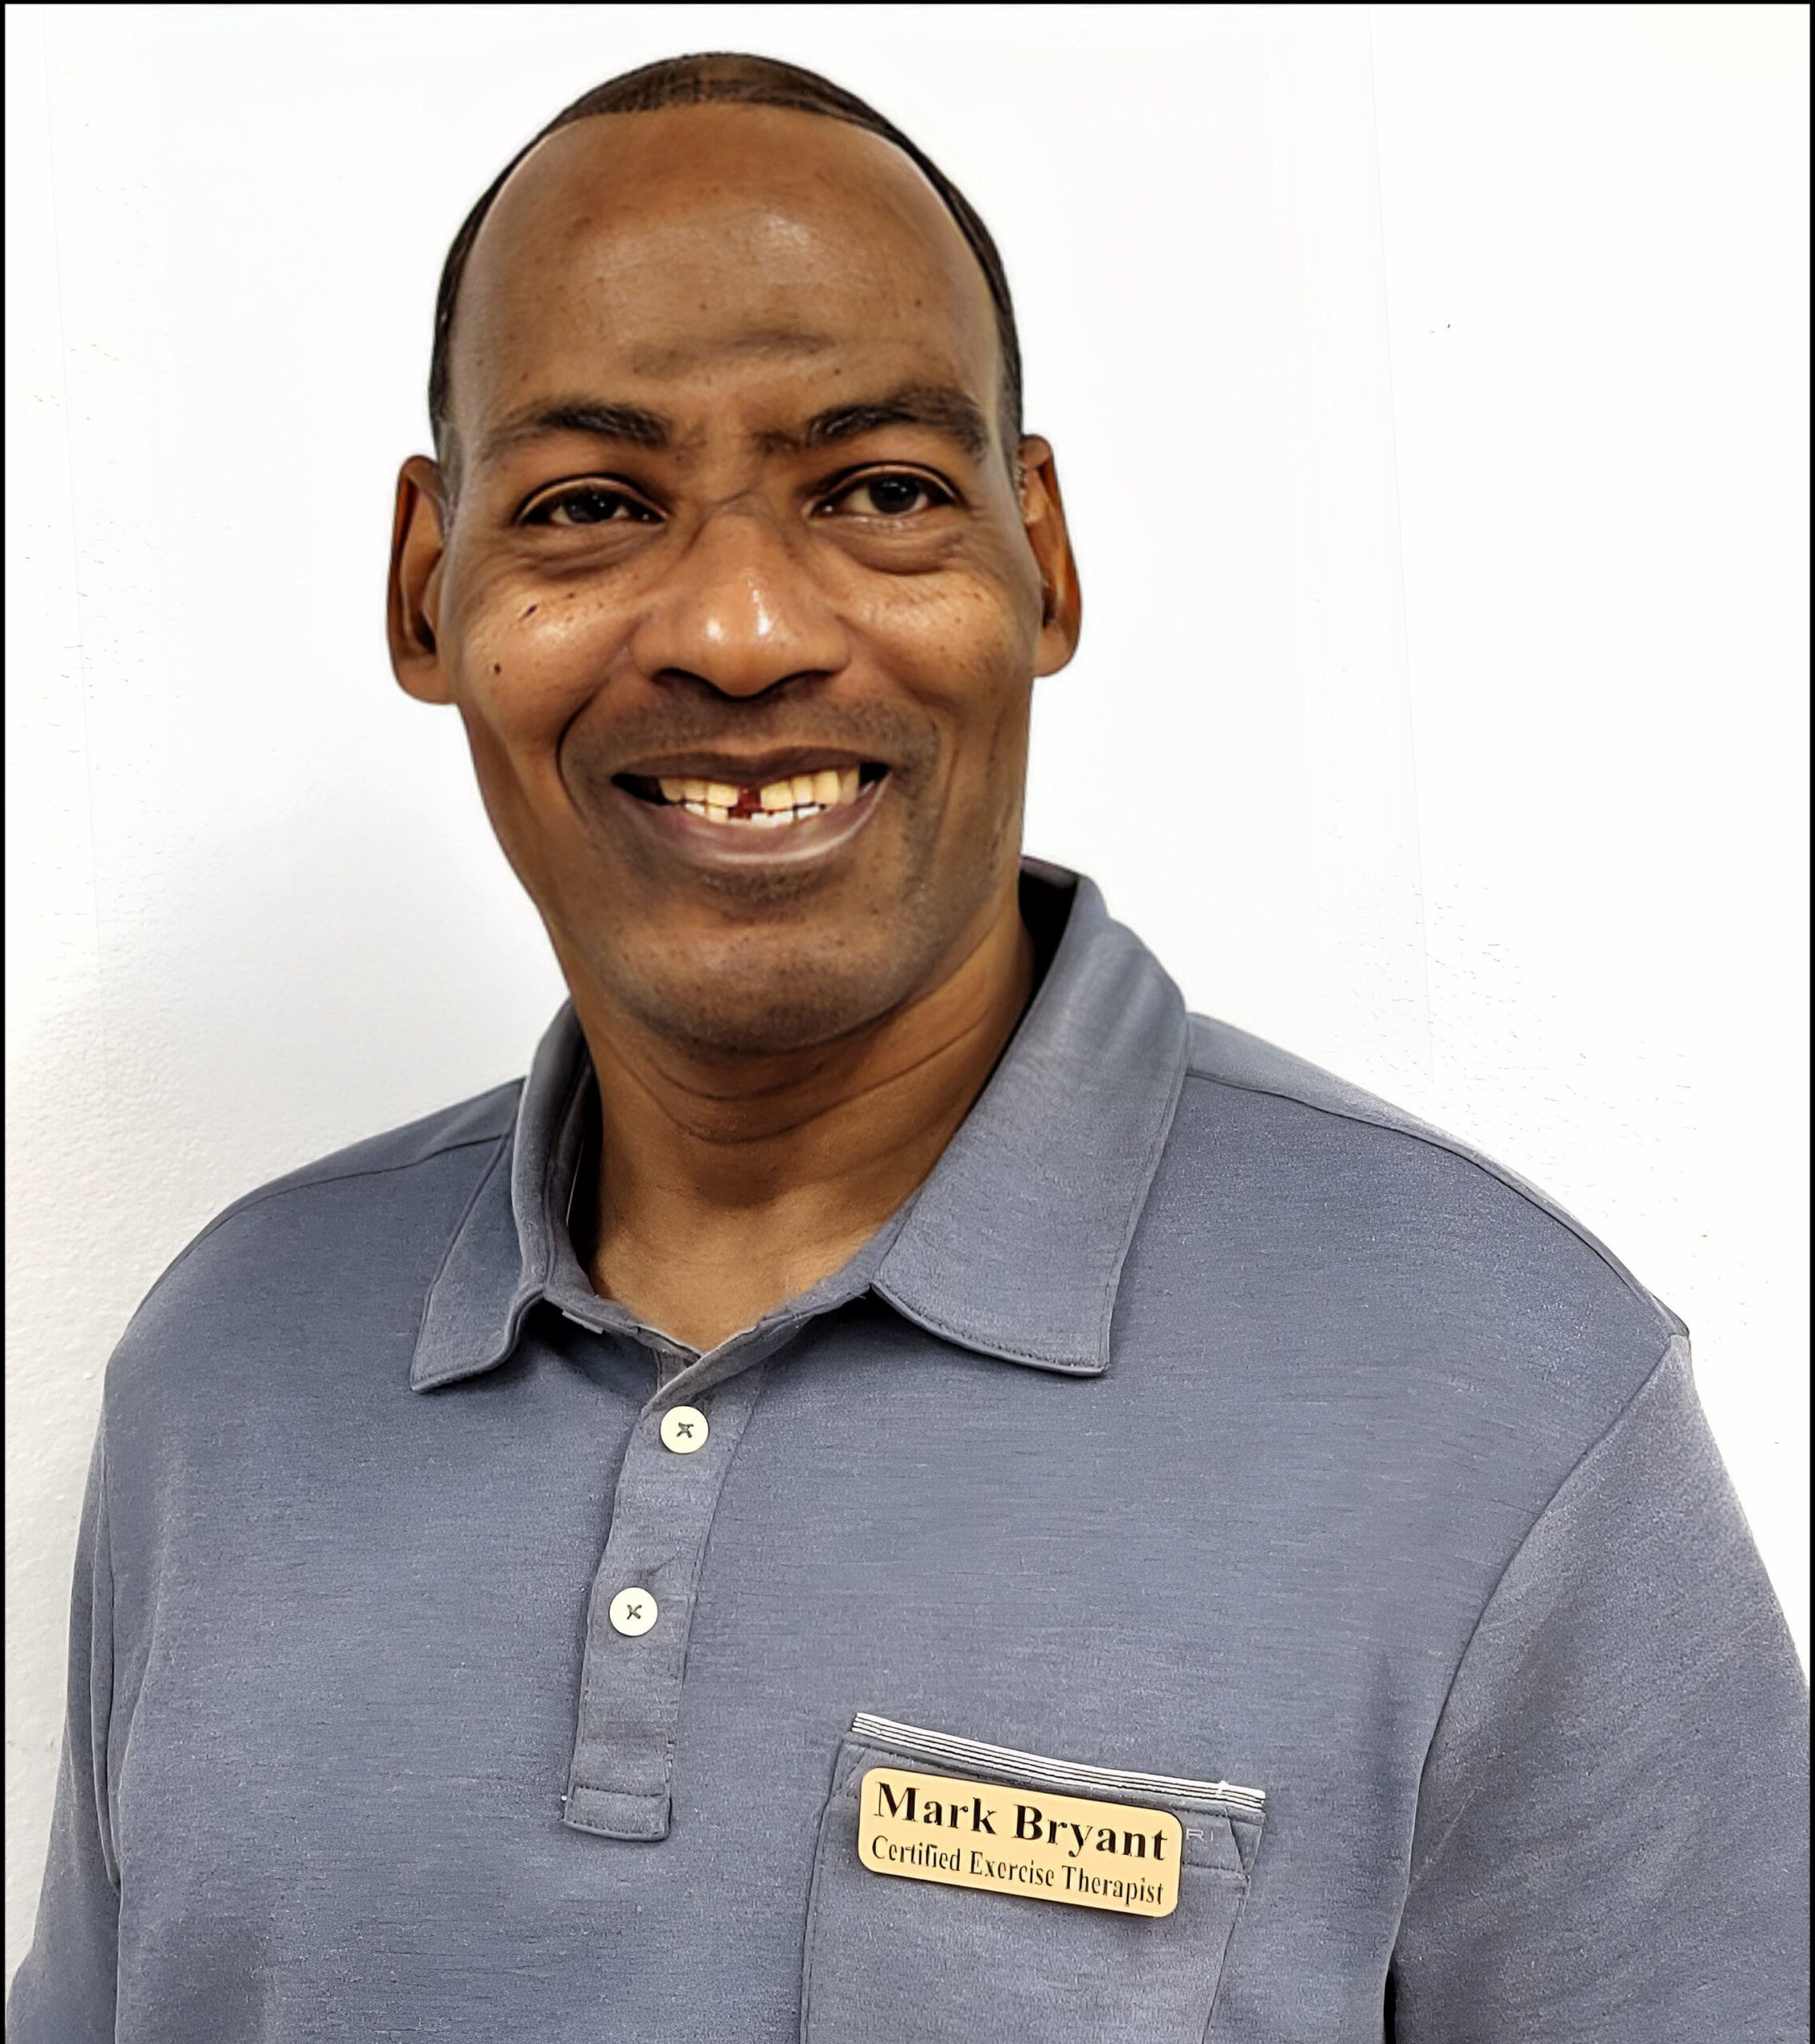 Headshot of a Black man with tight buzzed hair smiling and wearing a blue/gray polo shirt with a nametag that reads "Mark Bryant Certified Exercise Therapist"